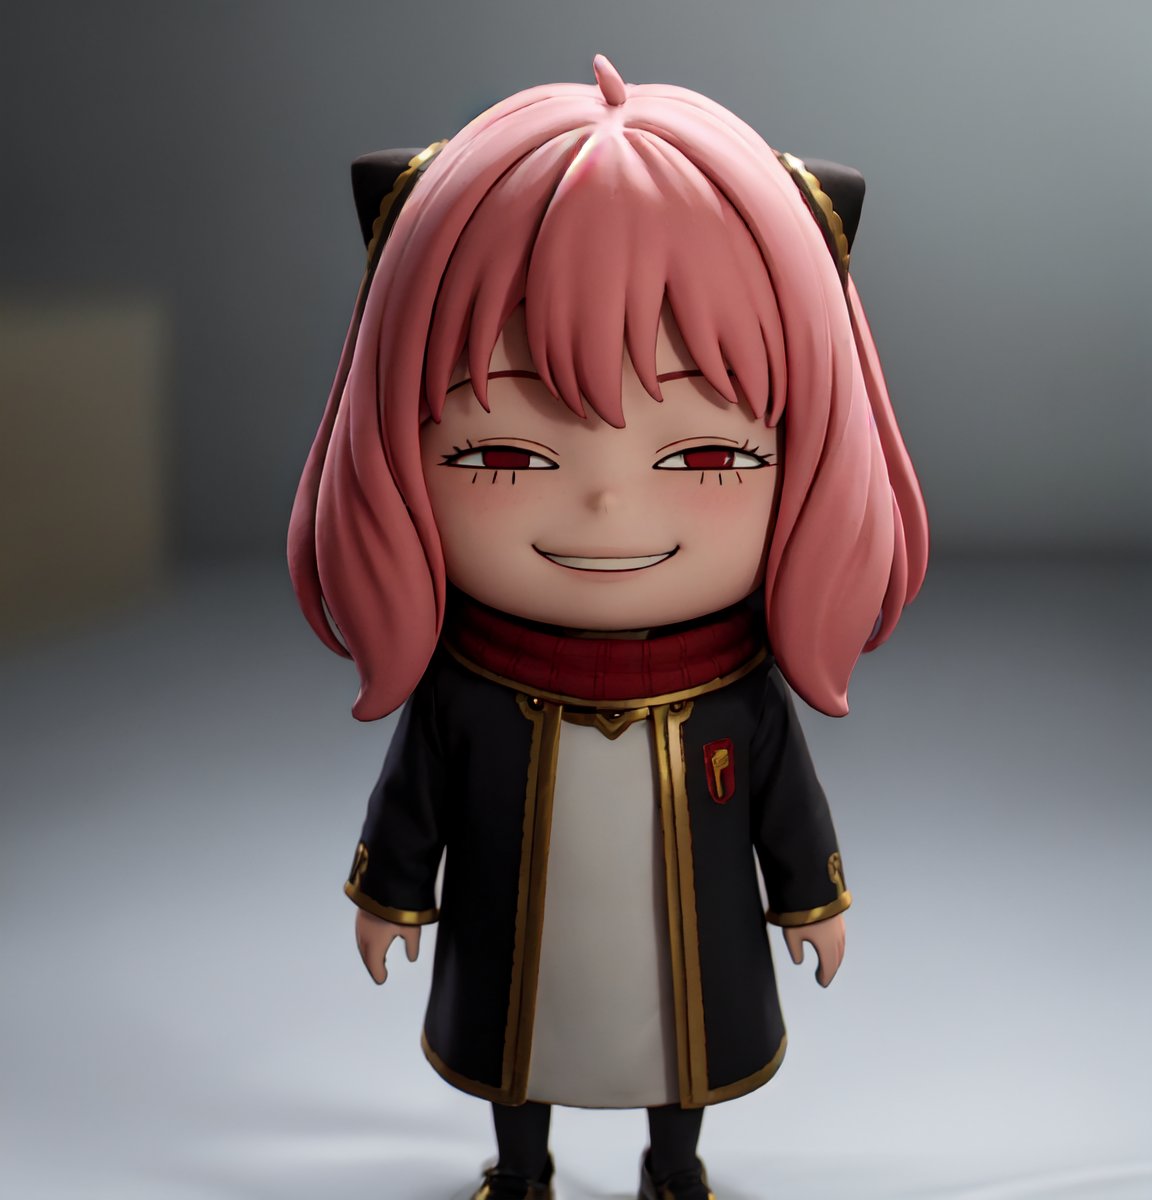 masterpiece, best quality, high resolution, PVC, render, chibi, high resolution, single woman, Anya Forger, pink hair, bob hair, 1girl, long hair, hogrobe, black robe, gryffindor, red tie, hogscarf, red scarf,  grey eyes, smiling, selfish target, chibi, prohibition era streetscape, smiling, grinning, self-satisfied, full body, chibi, 3d figure, toy, doll, character print, front view, natural light, ((realistic)) 1.2)), dynamic pose, medium movement, perfect cinematic perfect lighting, perfect composition, Anya Forger spy x family, 1 girl,hogrobe